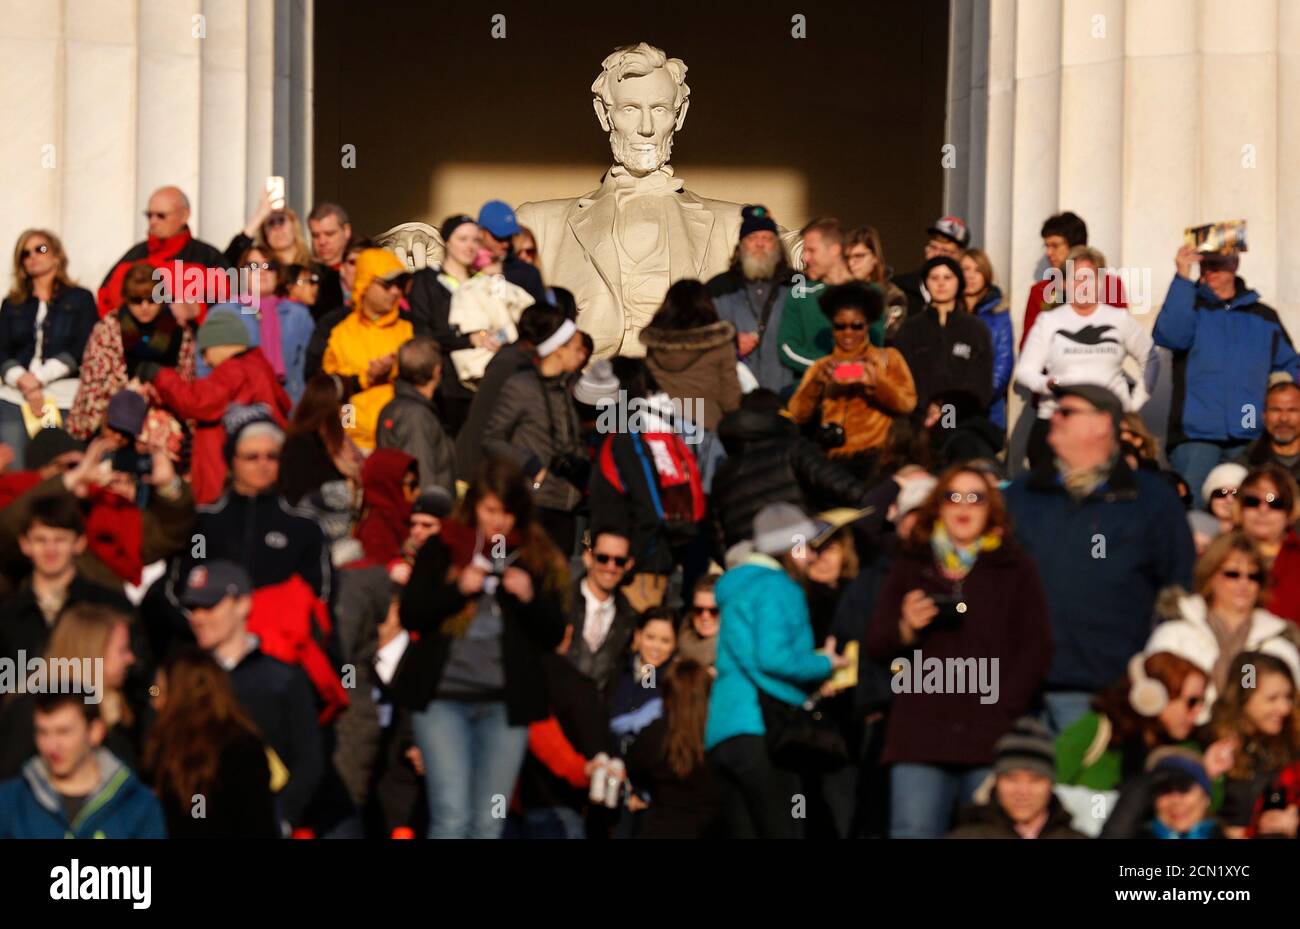 Crowds stand on the steps  at the Lincoln Memorial in Washington during an Easter morning sunrise religious service April 5, 2015. On April 15 the United States commemorates the 150th anniversary of President Abraham Lincoln's assassination. Events will include the re-enactment of his funeral in Springfield, Illinois, as well as talks and plays at Ford's Theatre in Washington D.C., where Confederate sympathiser John Wilkes Booth shot him in 1865. Lincoln, who kept the Union together in the American Civil War and helped secure the end of slavery, has enduring appeal both in the United States an Stock Photo